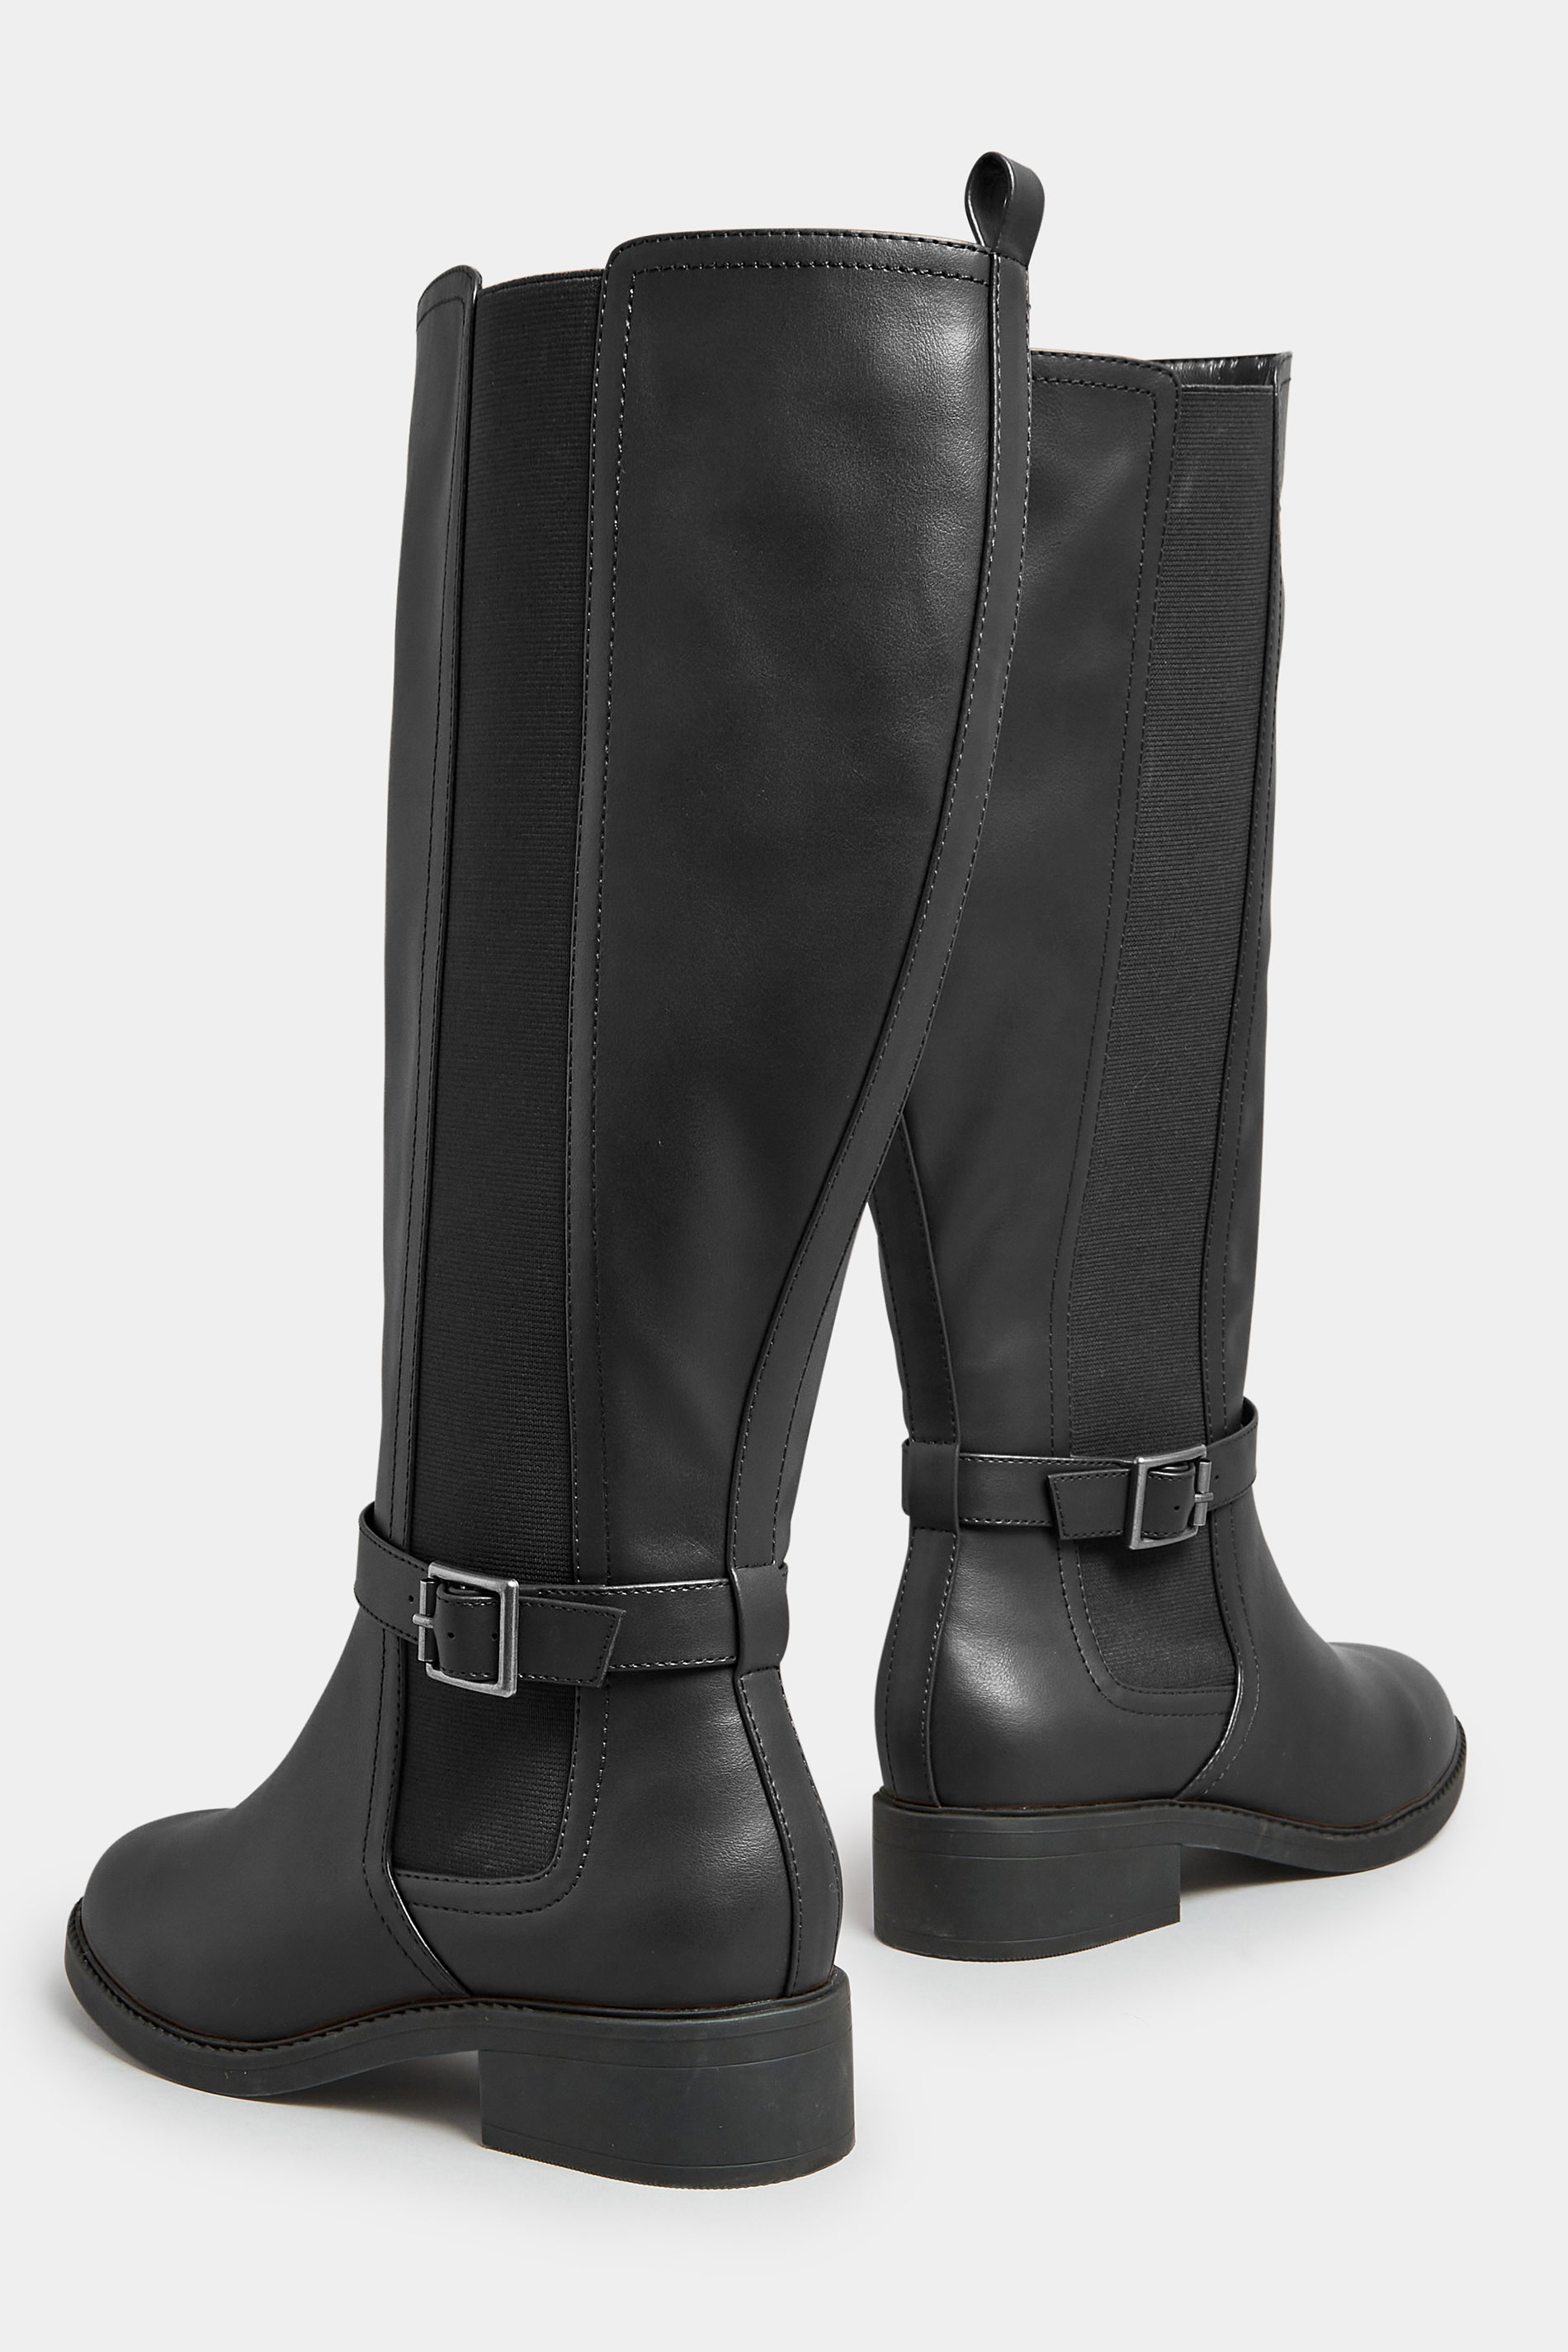 Black Faux Leather Buckle Knee High Boots In Wide E Fit & Extra Wide ...